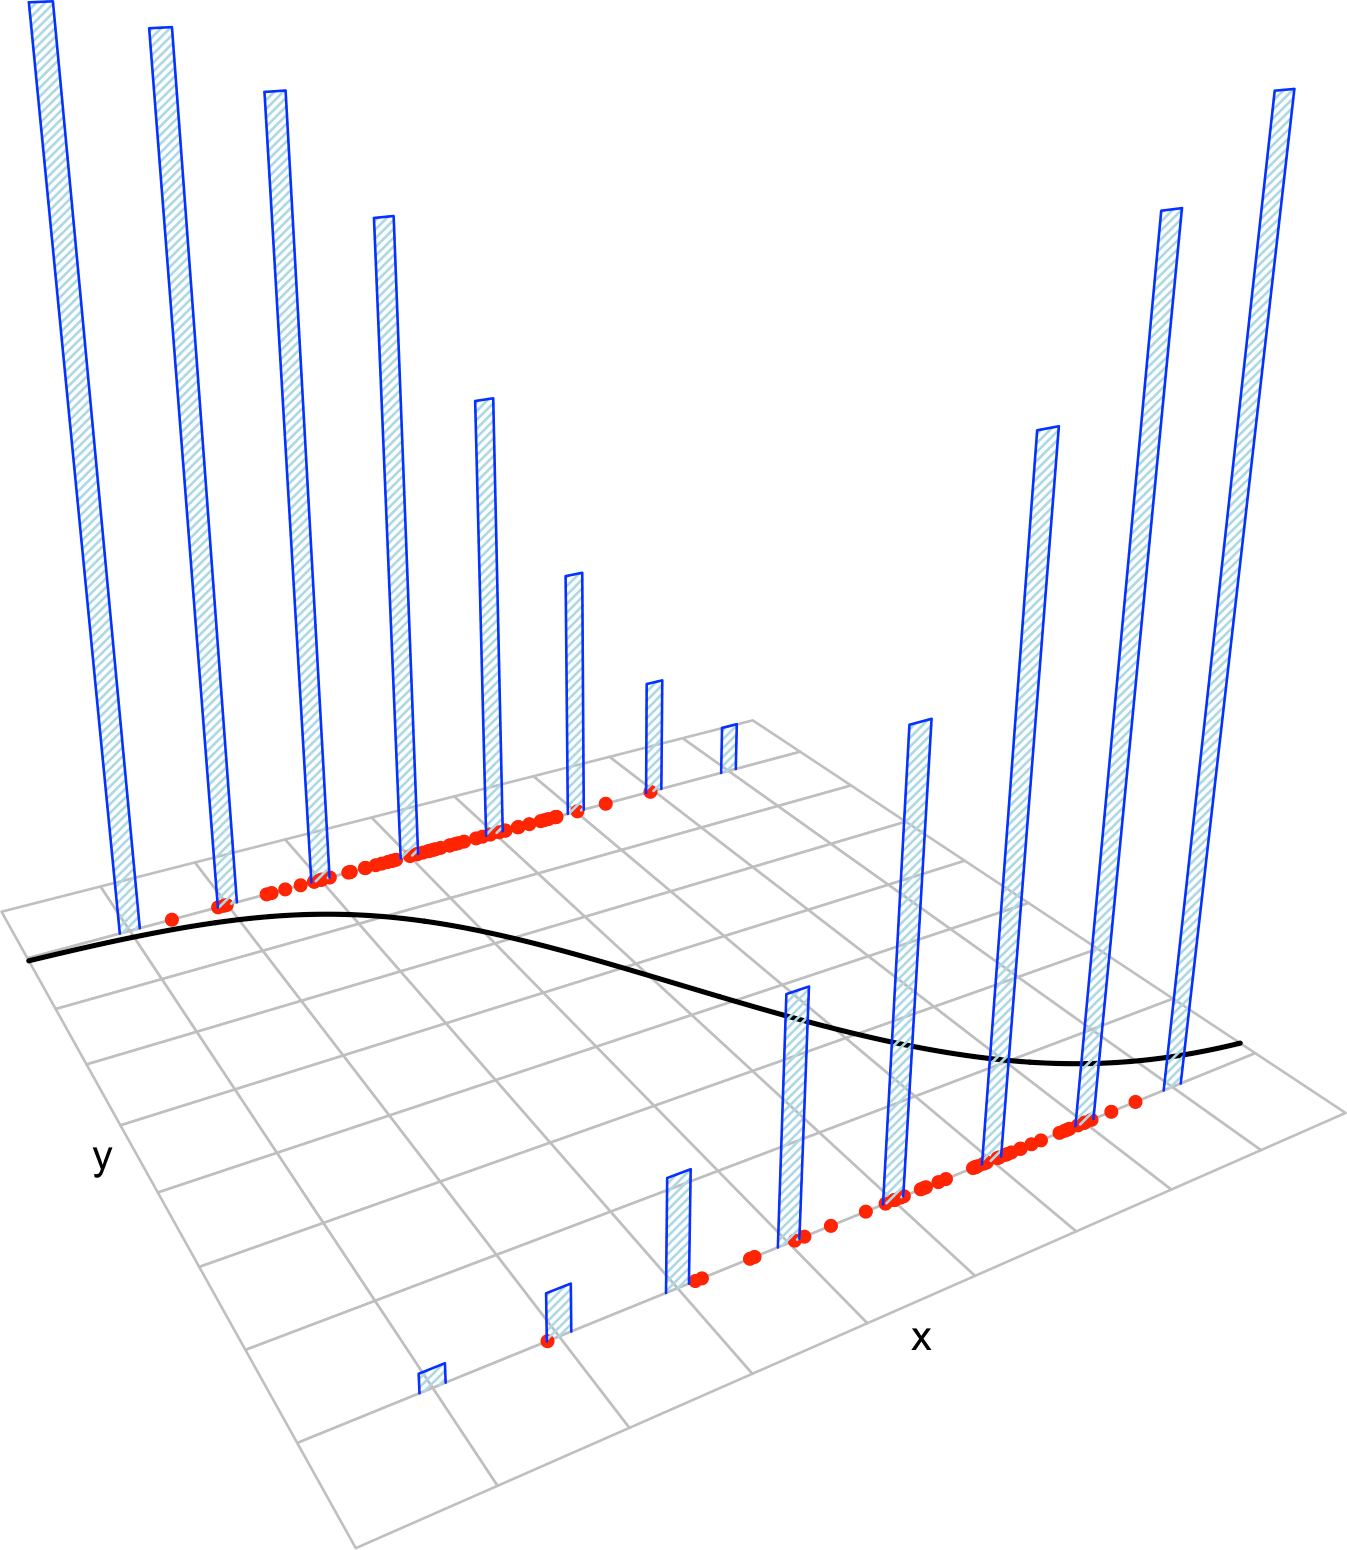 The key concepts of the logistic model. The blue bars represent the conditional distribution of probability of \(Y\) for each cut in the \(X\) axis. The red points represent a sample following the model.